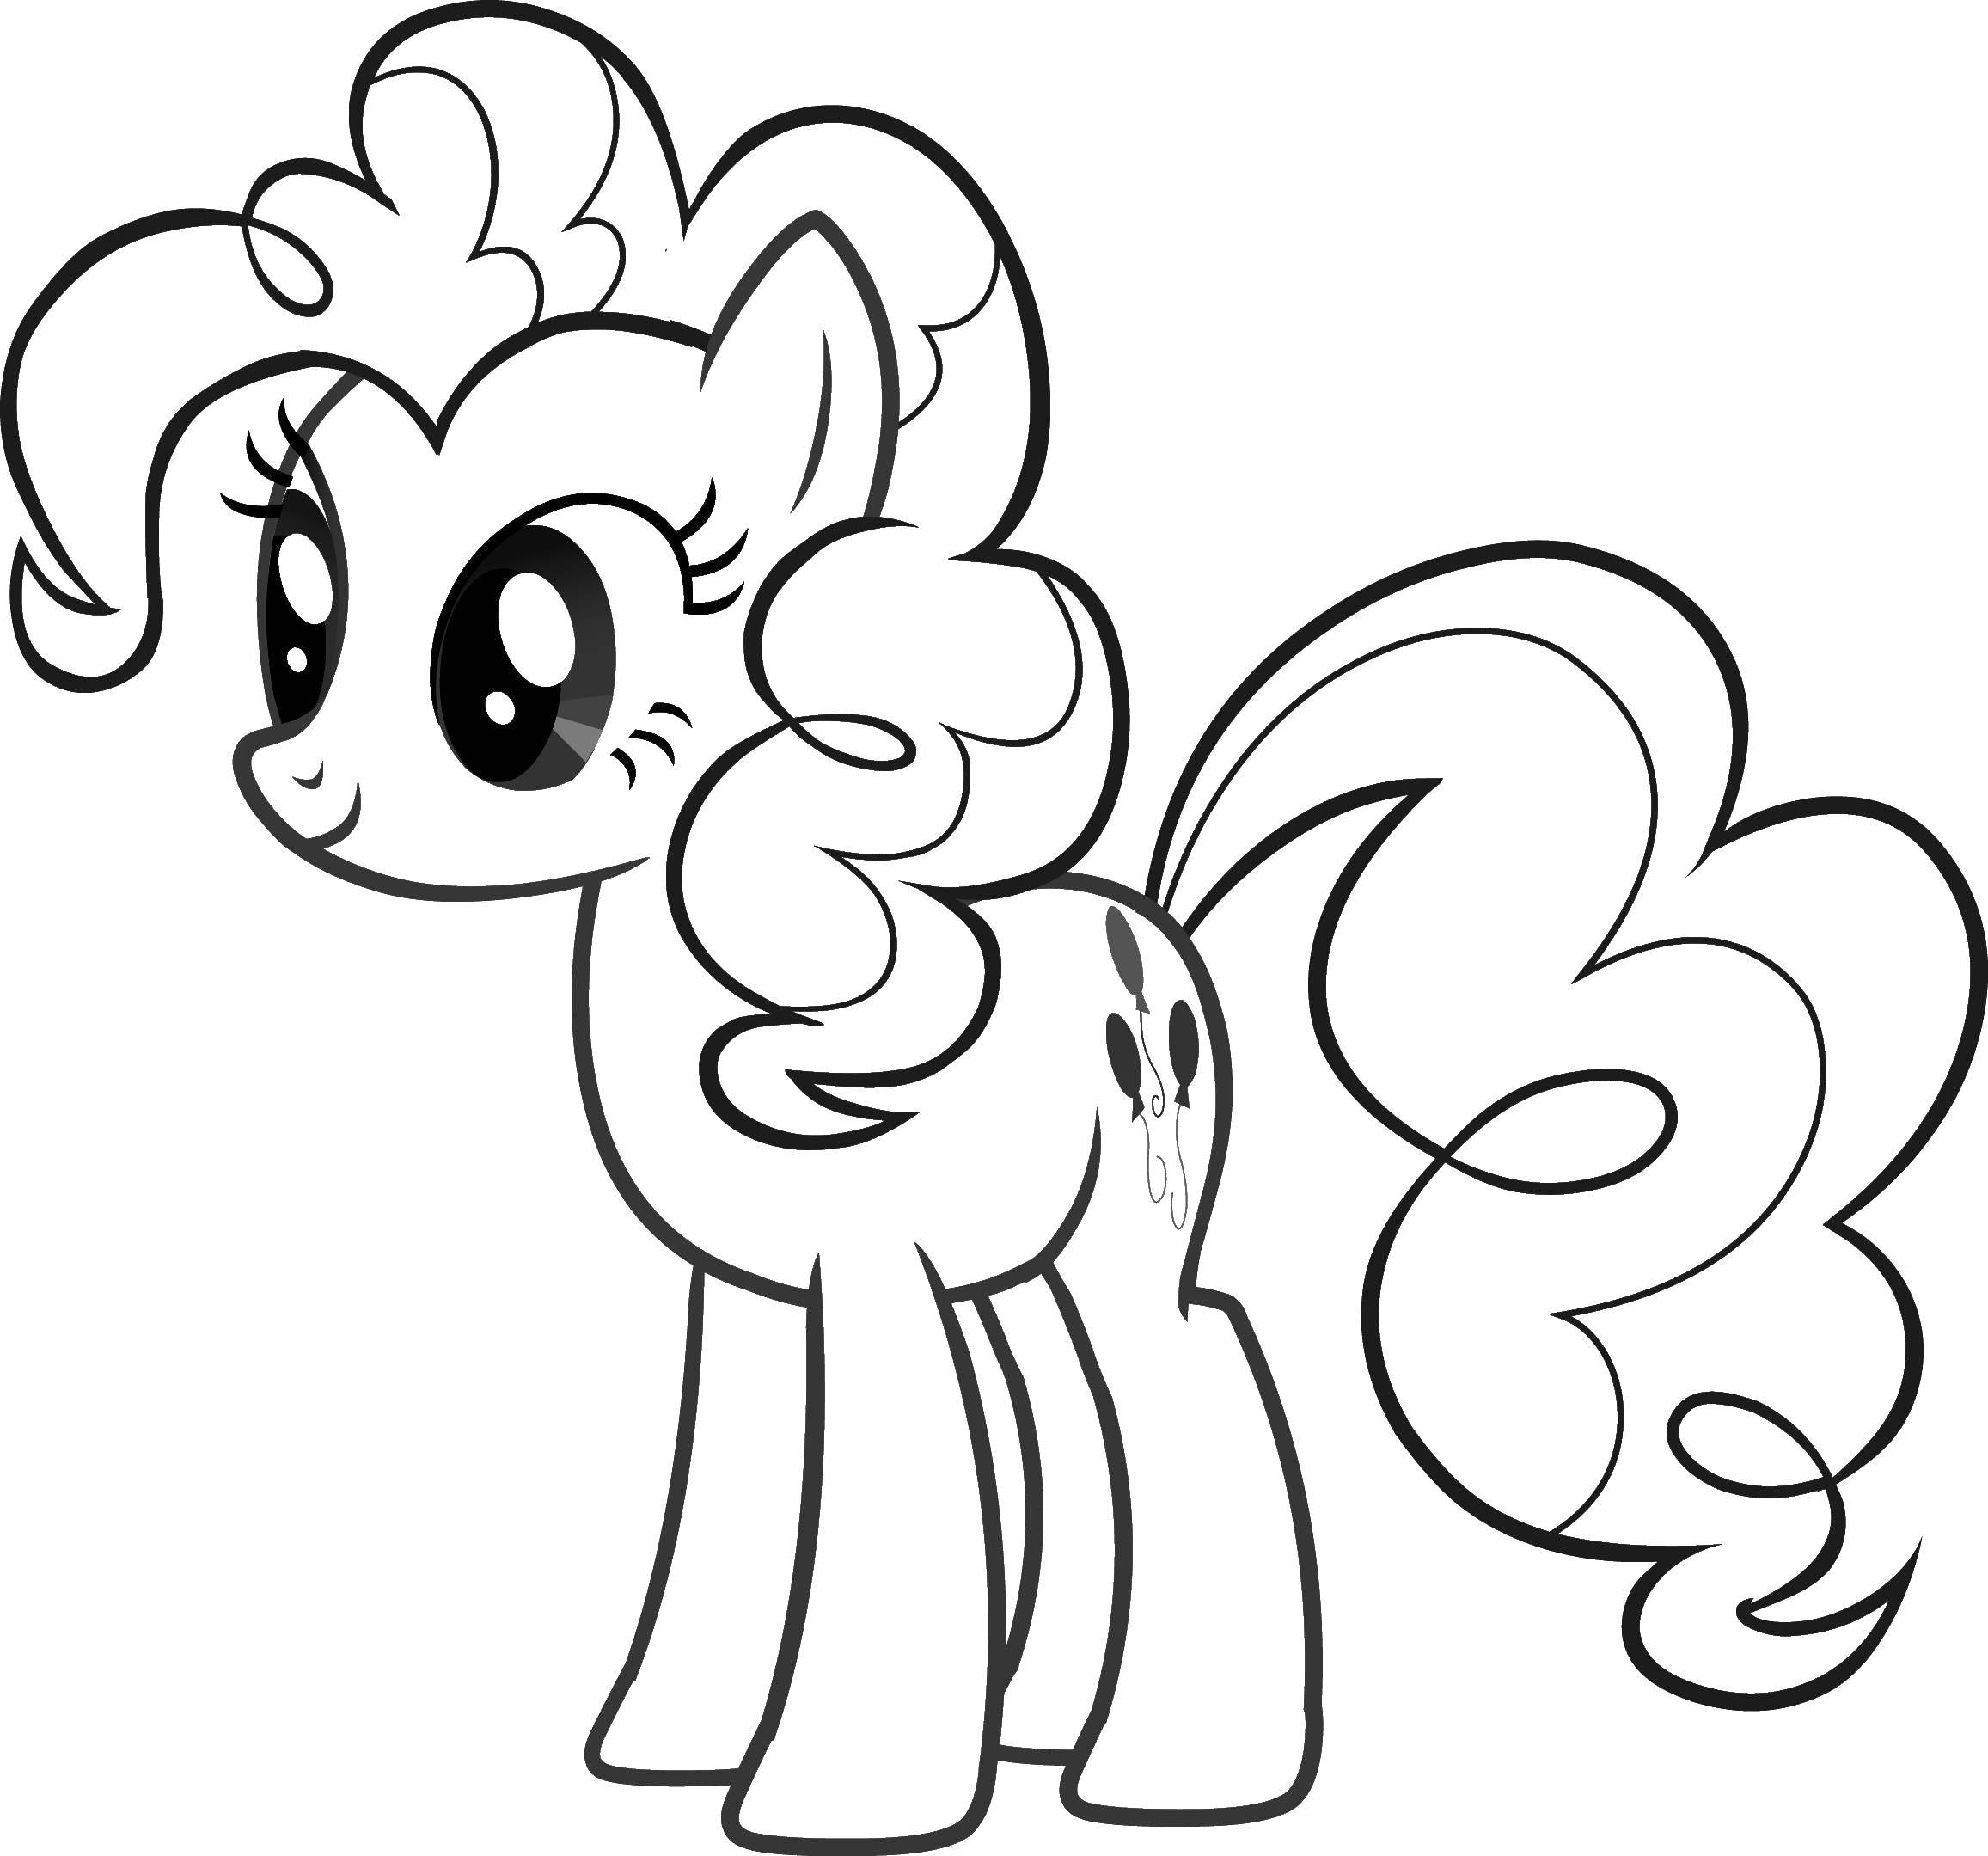 Coloring Cute pony from my little pony. Category my little pony. Tags:  pony tale, girls games, my little pony.